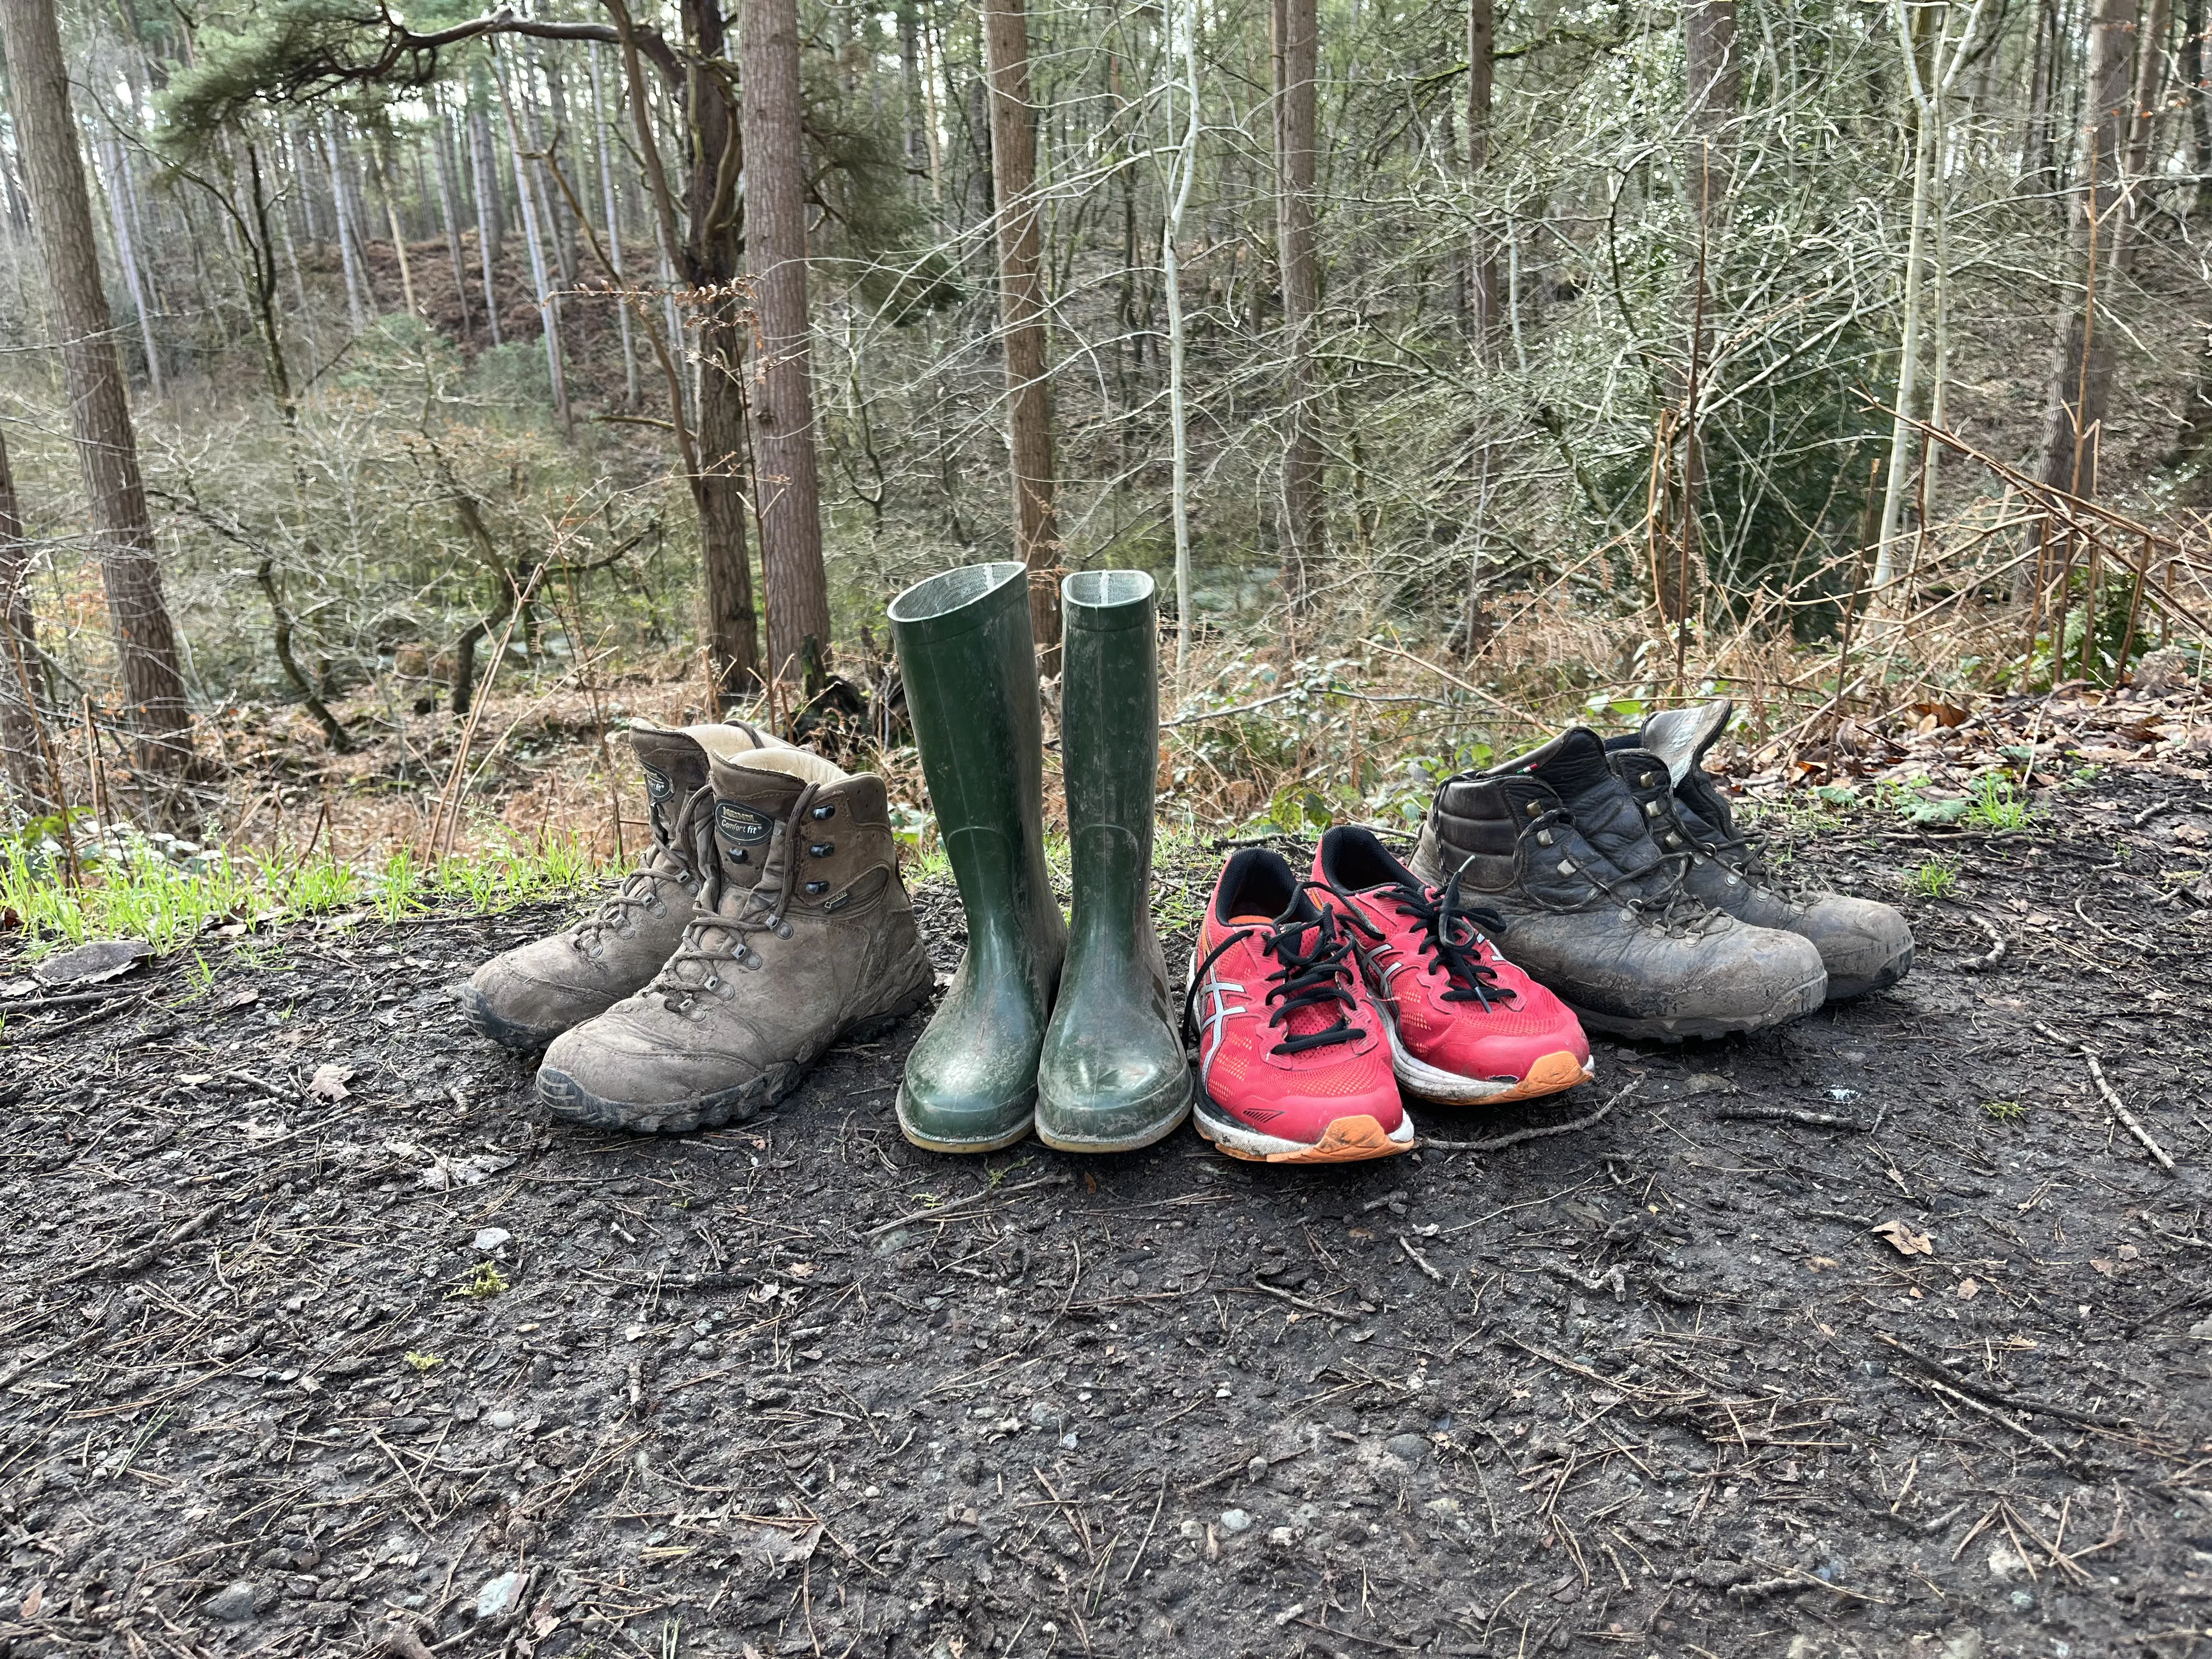 Walking boots, wellies and walking shoes on a muddy path with forest in the background.